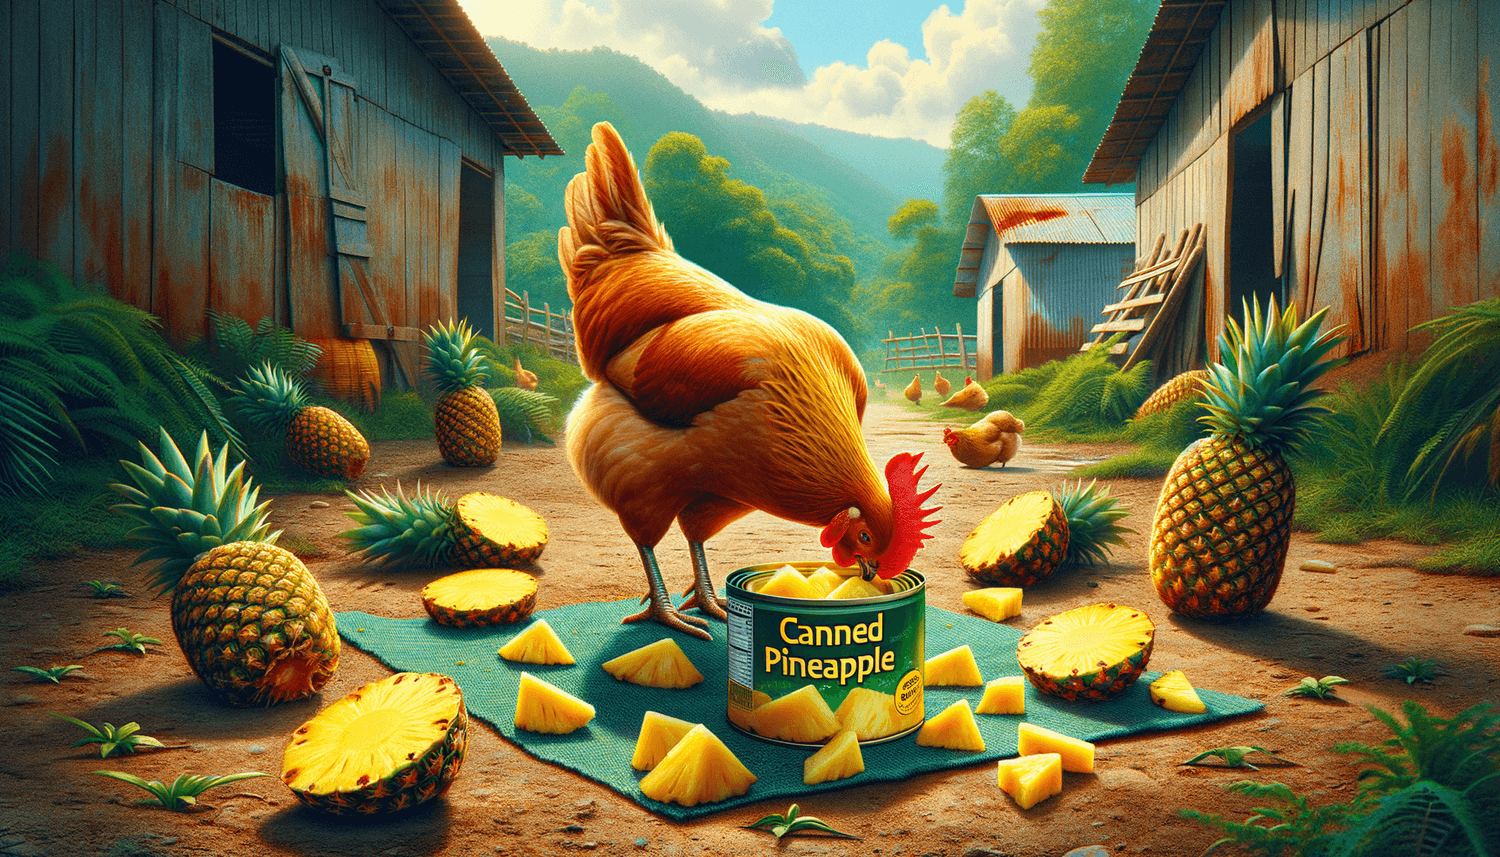 Can Chickens Eat Canned Pineapple?